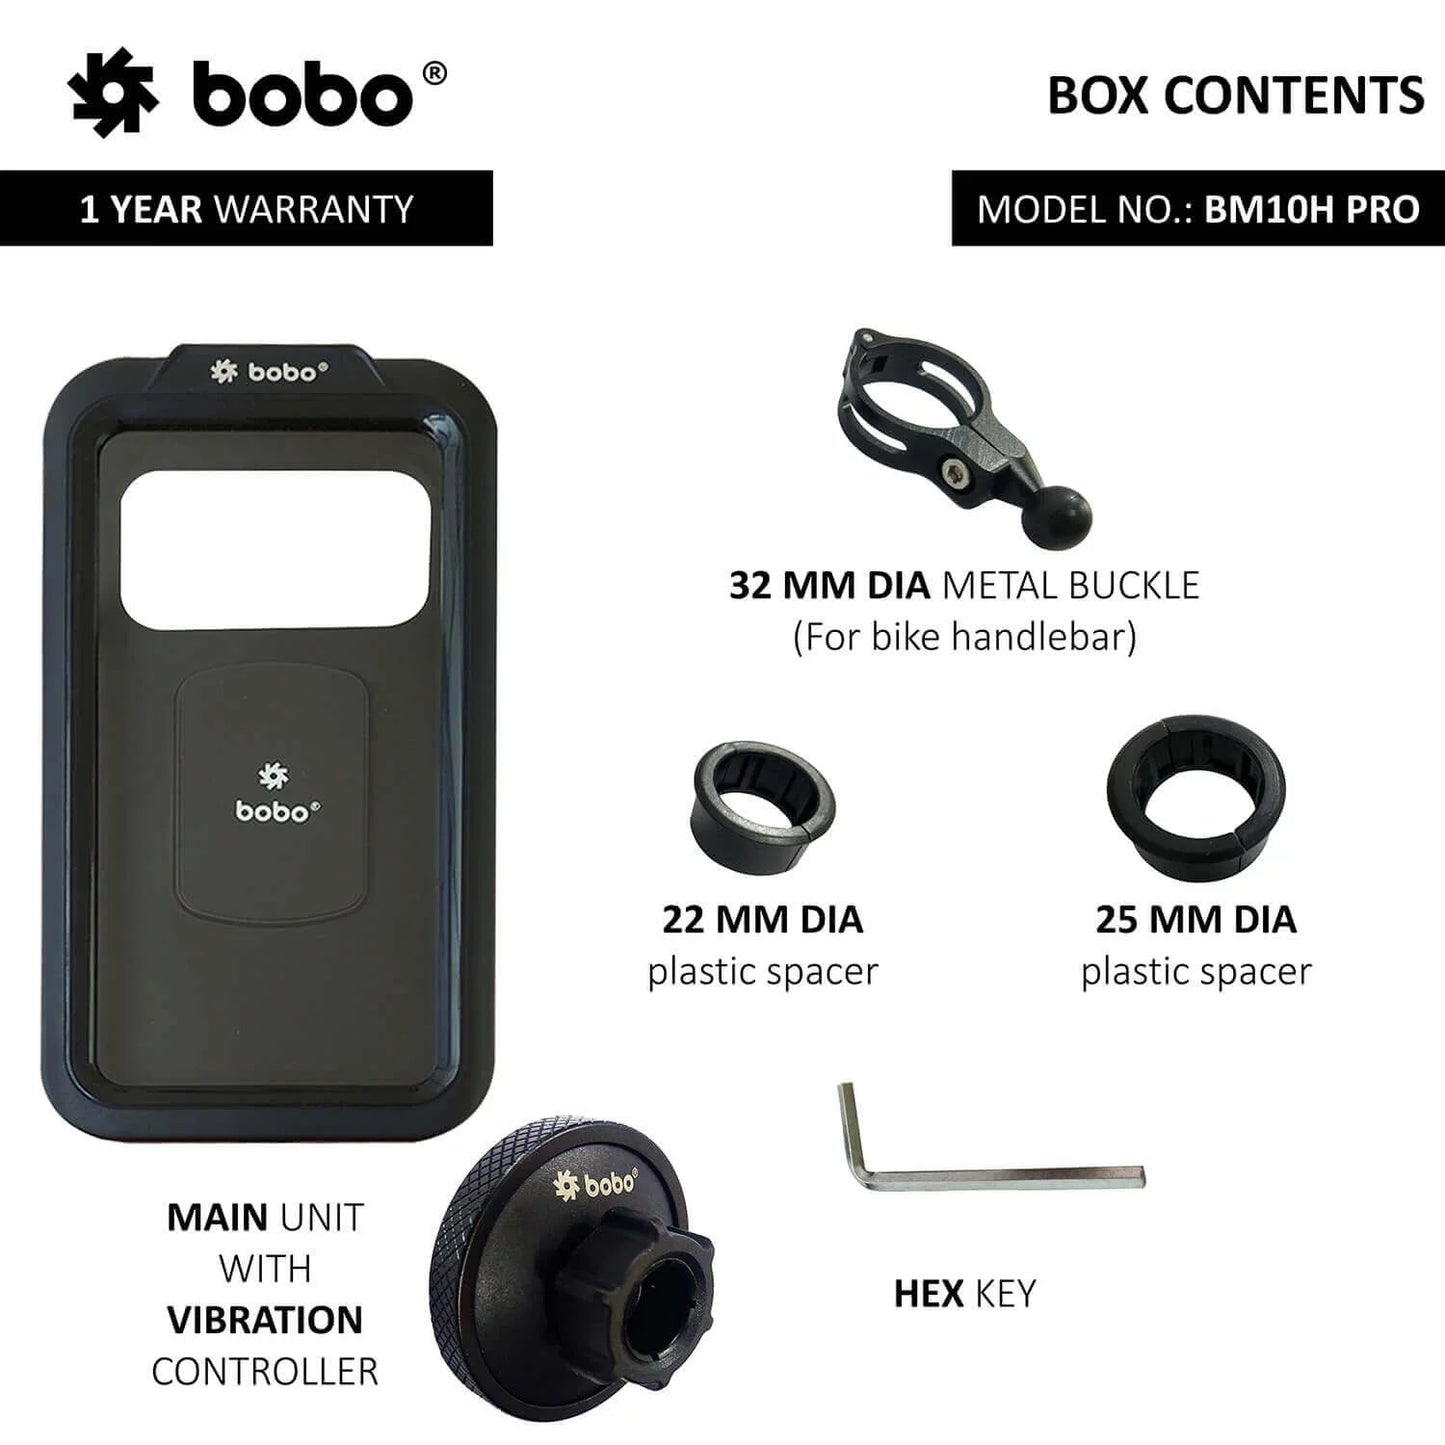 BOBO BM10H PRO Handlebar Mount with Vibration Controller, Fully Waterproof Bike/Motorcycle/Scooter Mobile Phone Holder Mount, Ideal for Maps and GPS Navigation (Black)